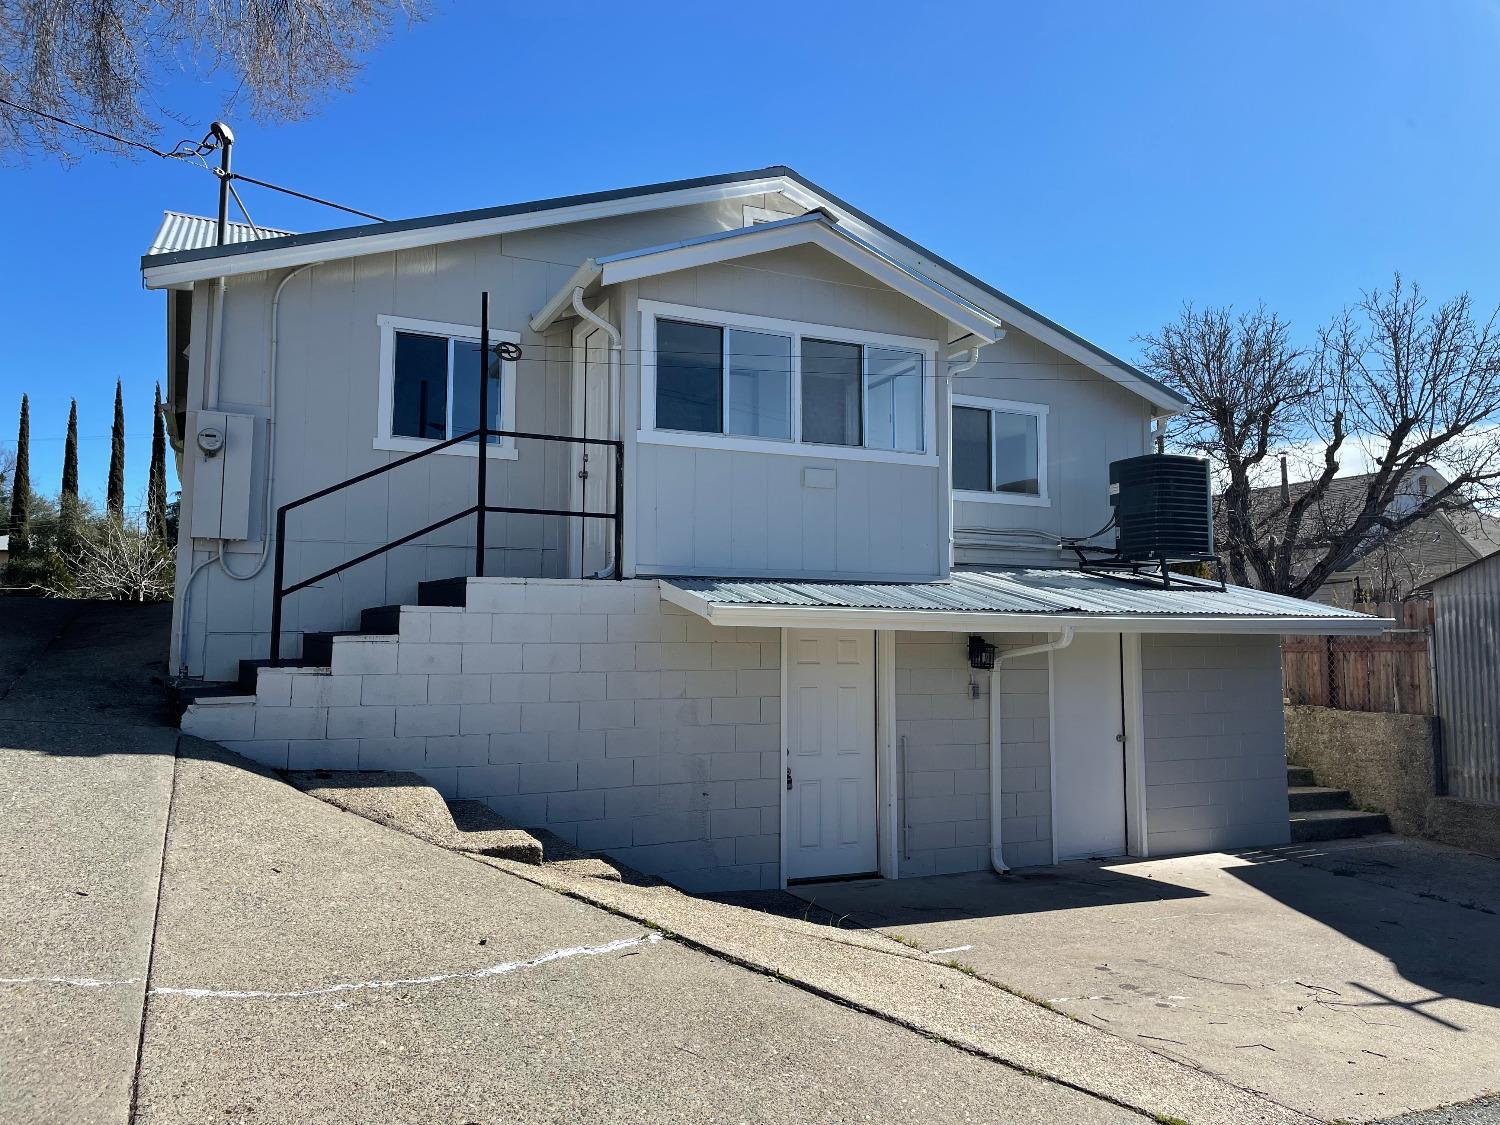 Photo of 159 Bright Ave in Jackson, CA